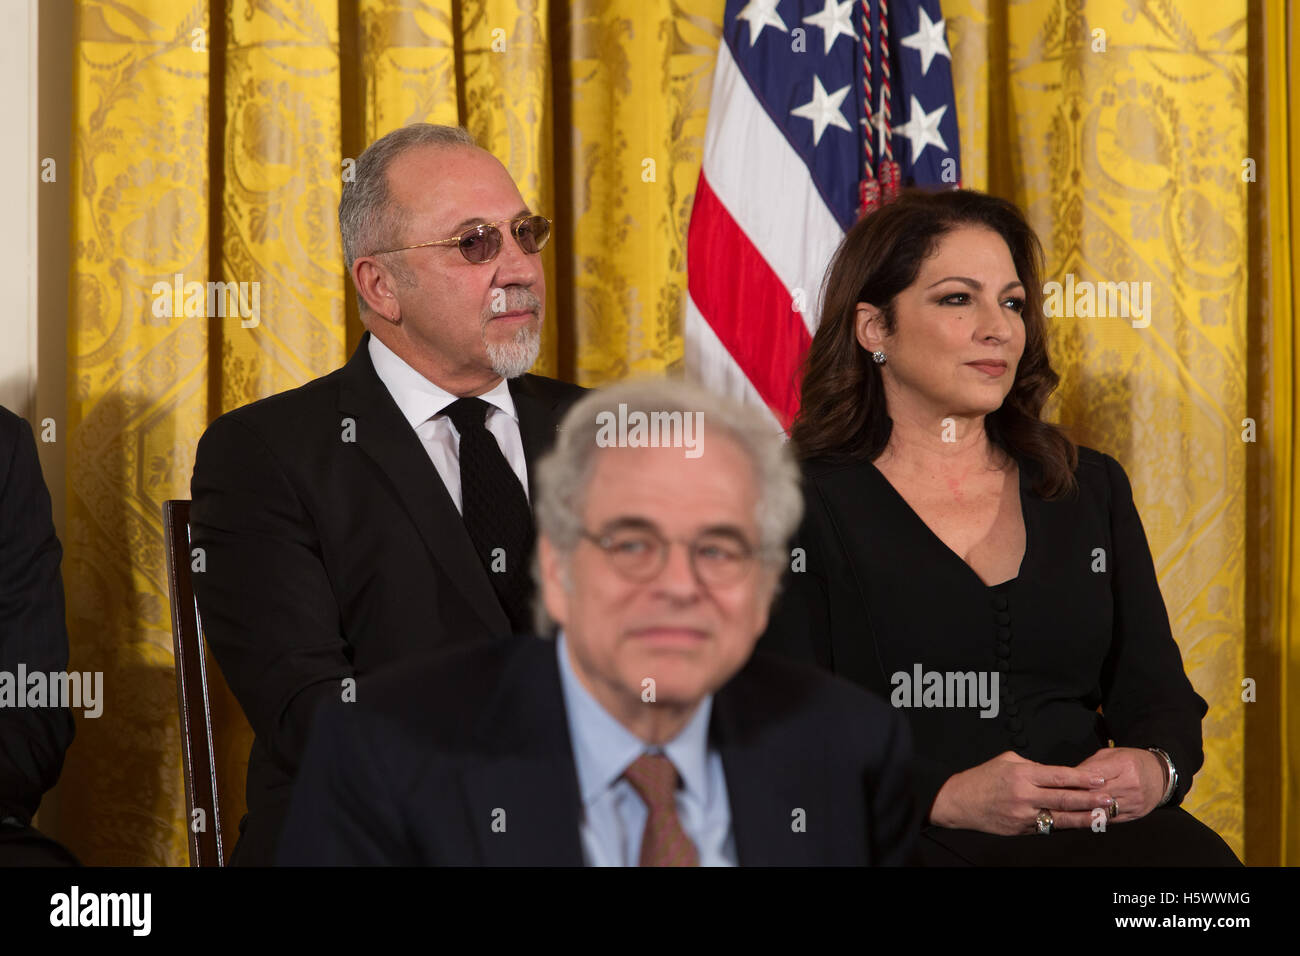 Emilio Estefan and Gloria Estefan attend the Presidential Medal of Freedom Awards at the White House in Washinton DC on November 24th, 2015 Stock Photo